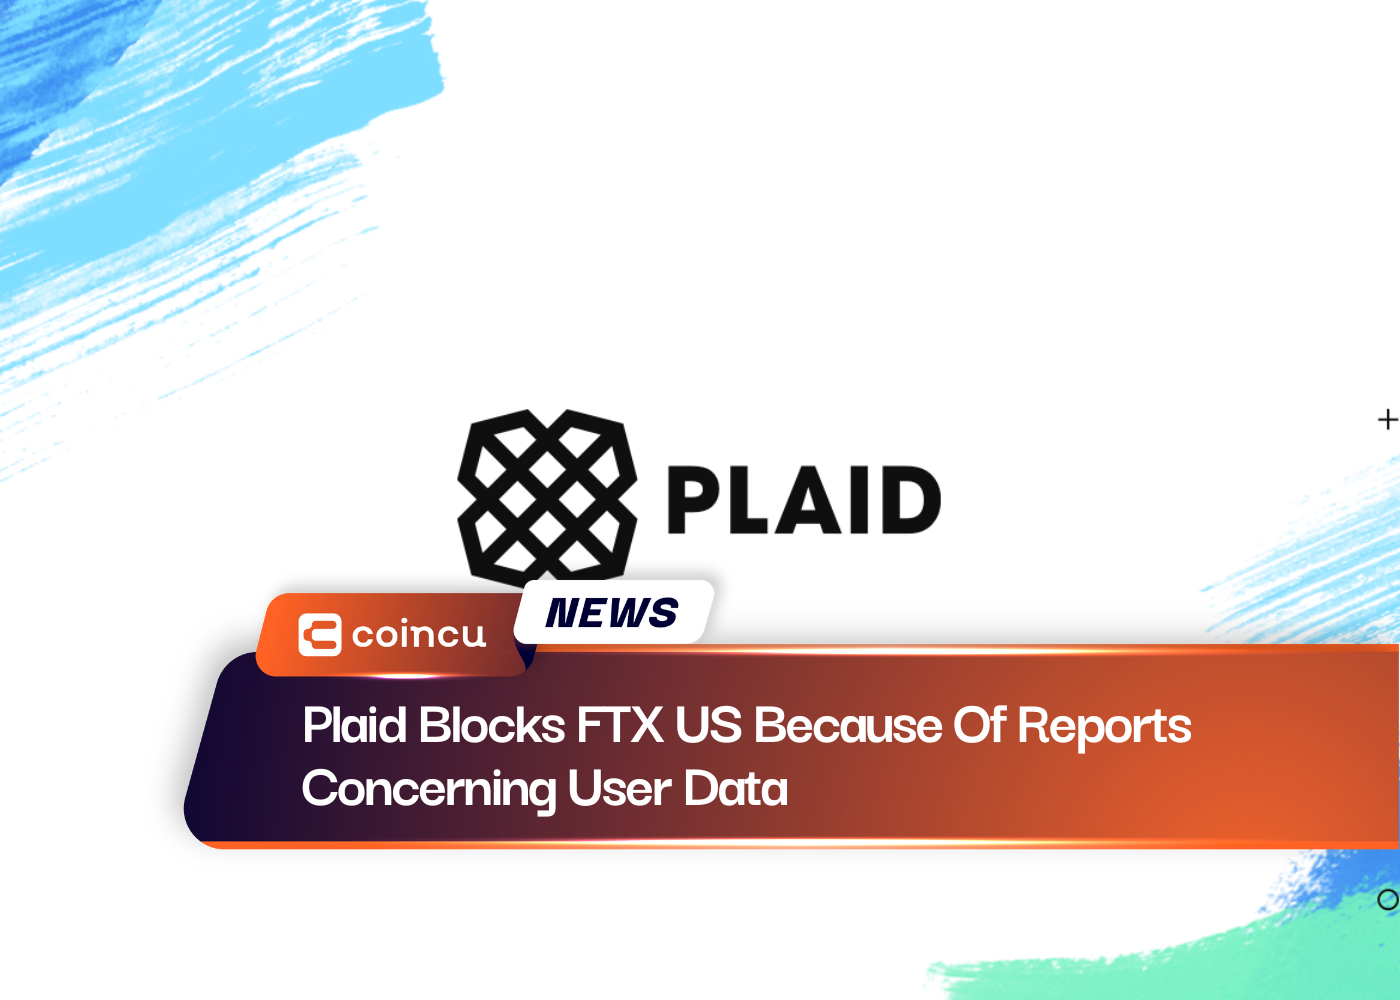 Plaid Blocks FTX US Because Of Reports Concerning User Data